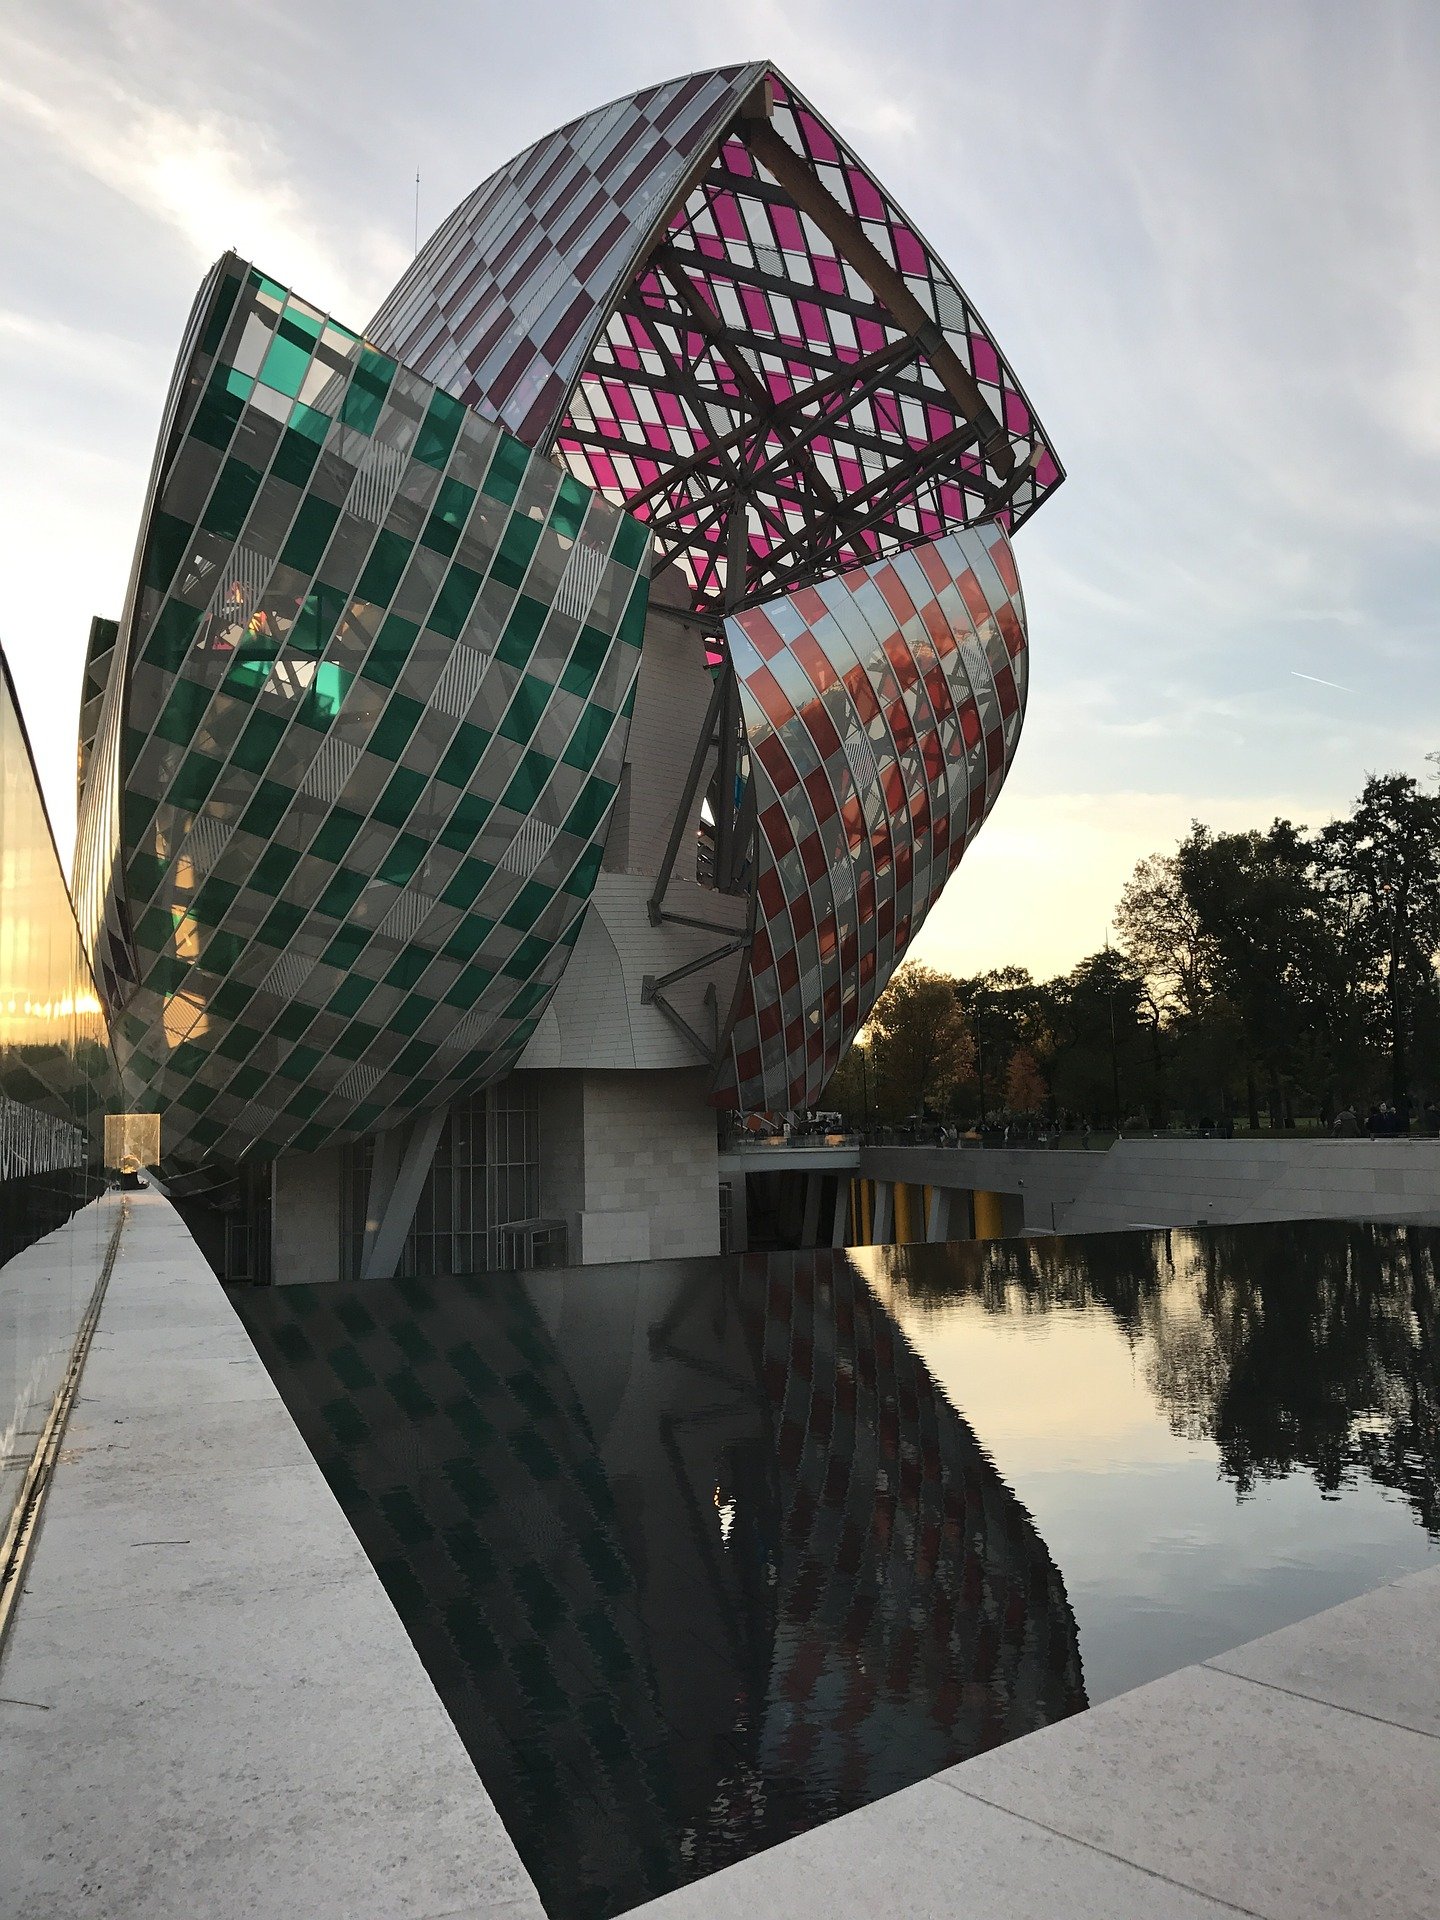 Fondation Louis Vuitton: Frank Gehry Reflects on the Making of an